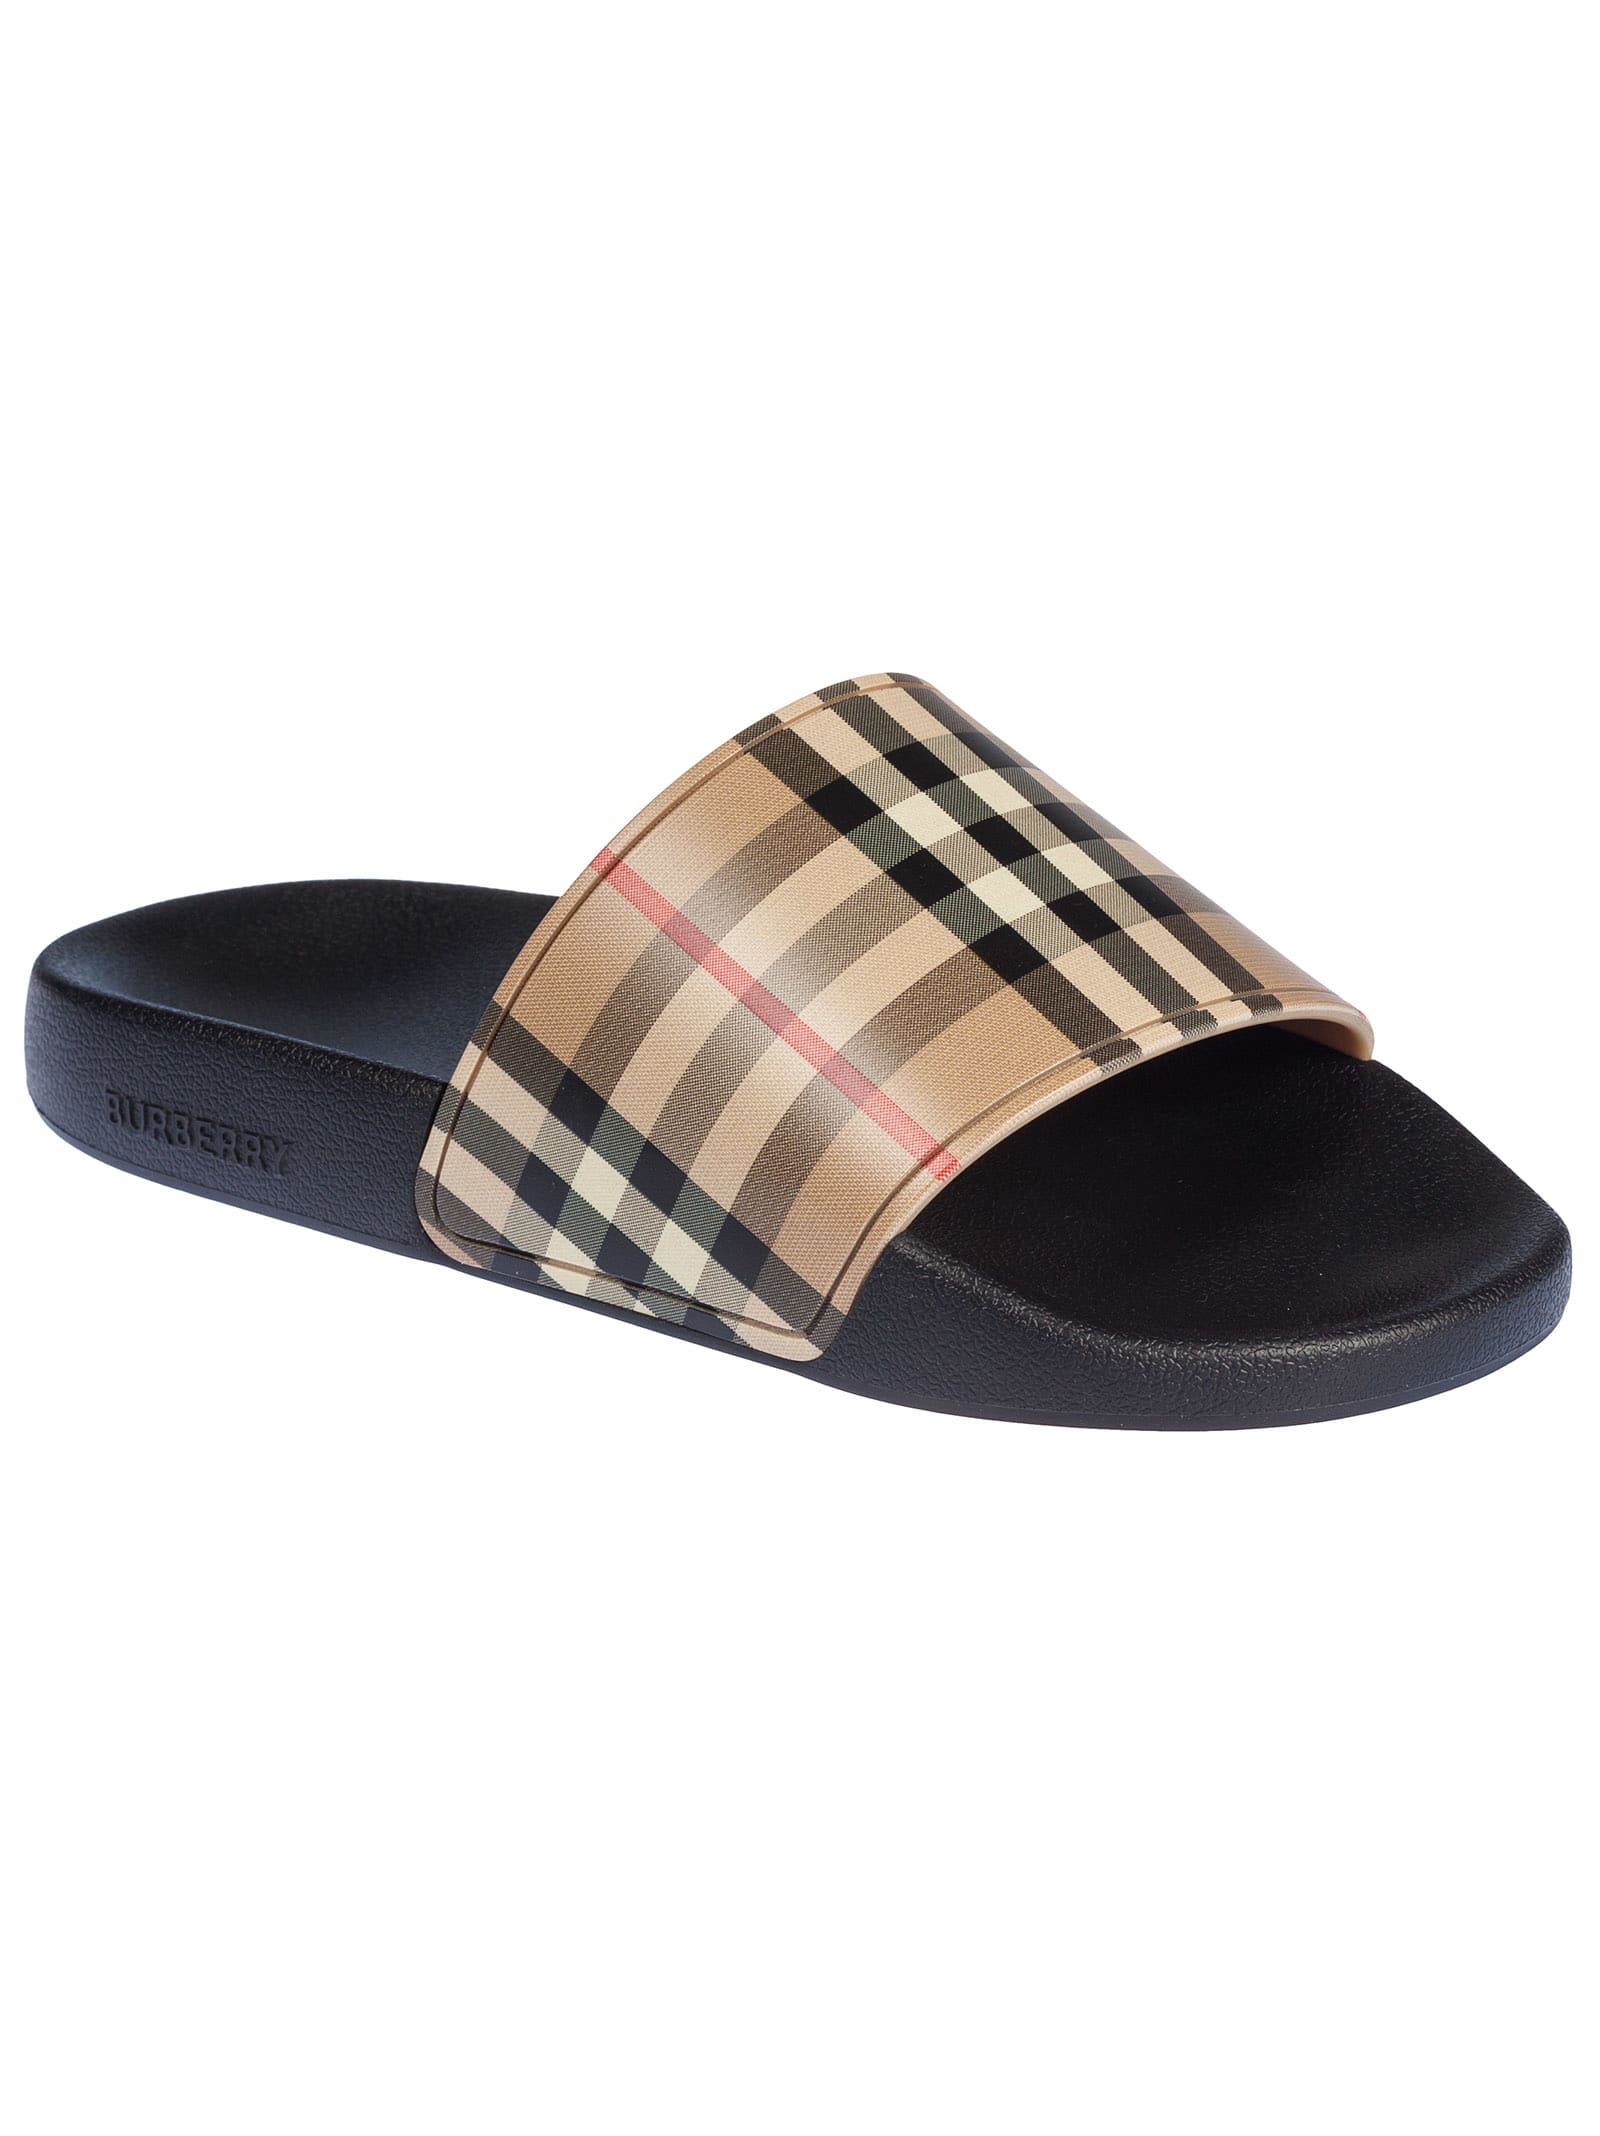 Burberry Burberry Checked Sliders - Archive Beige - 11242588 | italist